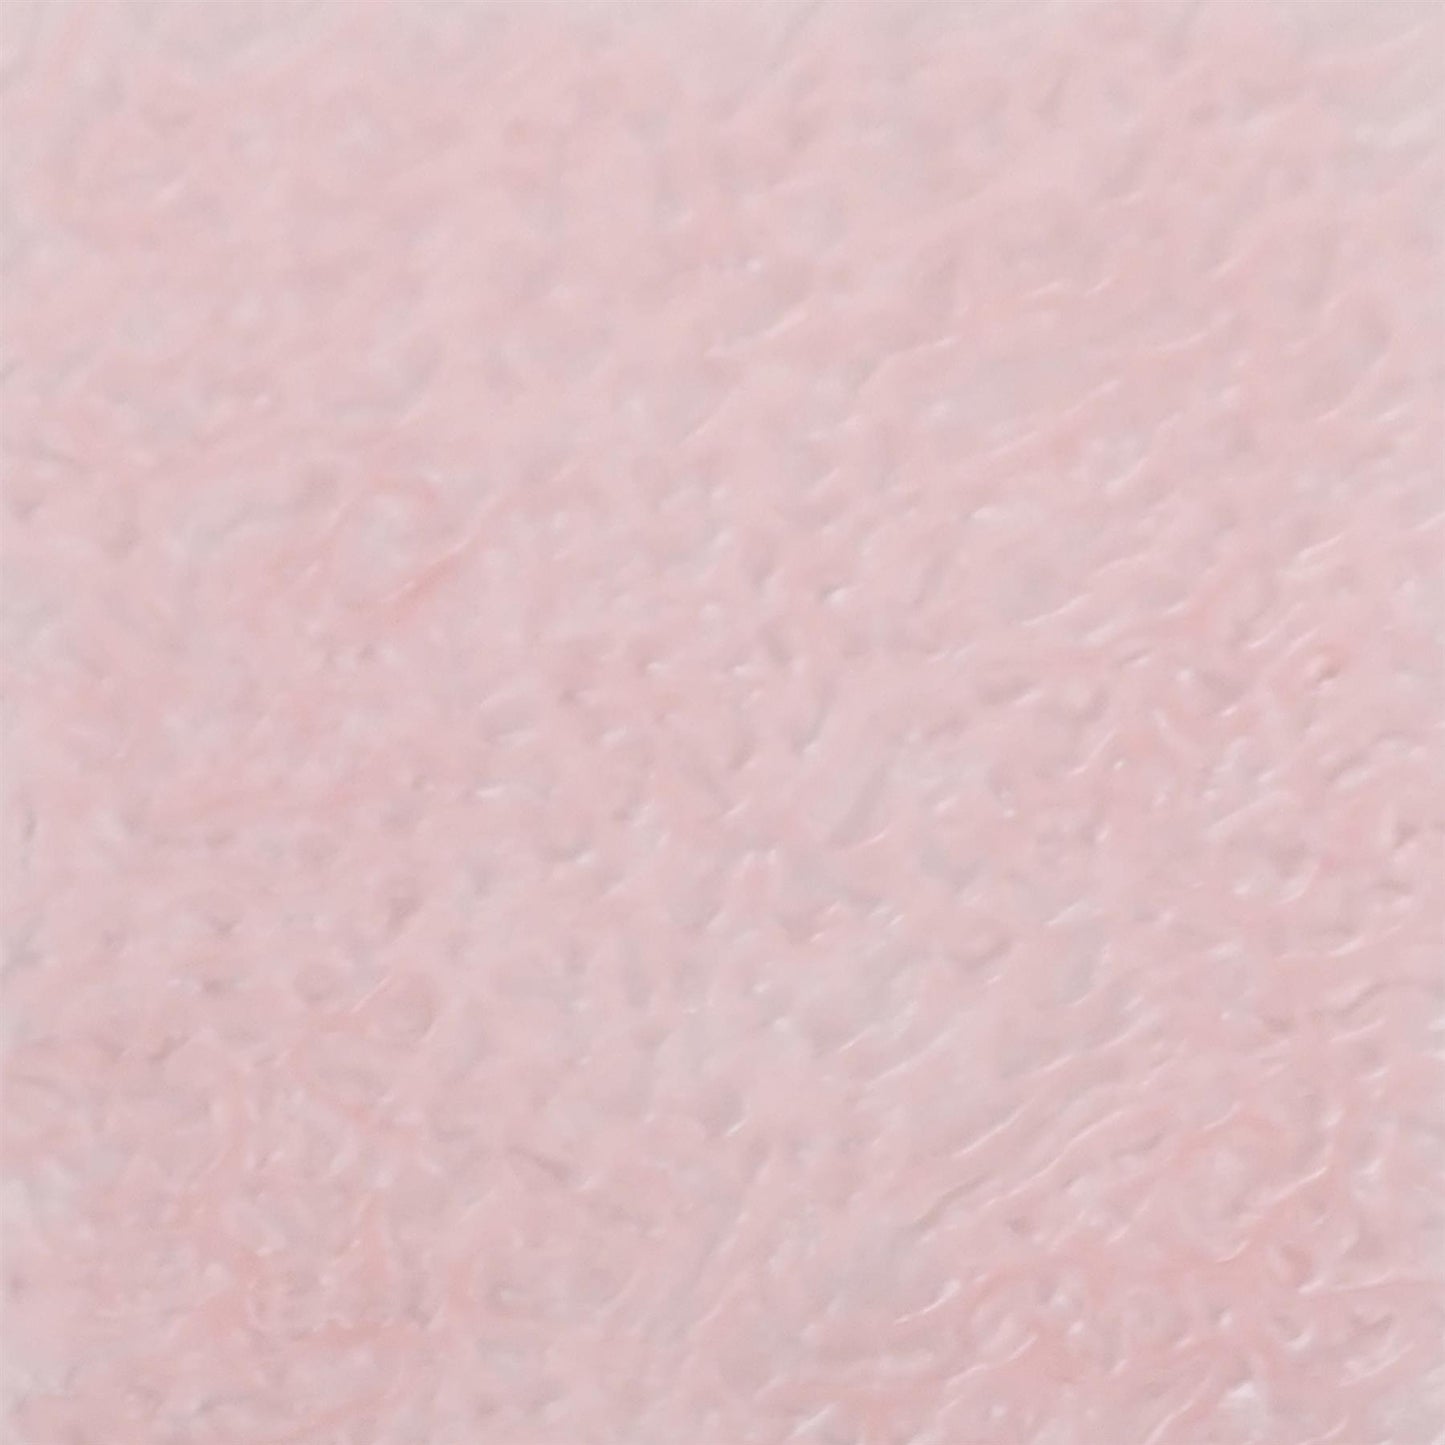 Incudo Baby Pink Lava Pearl Acrylic Sheet - 500x300x3mm